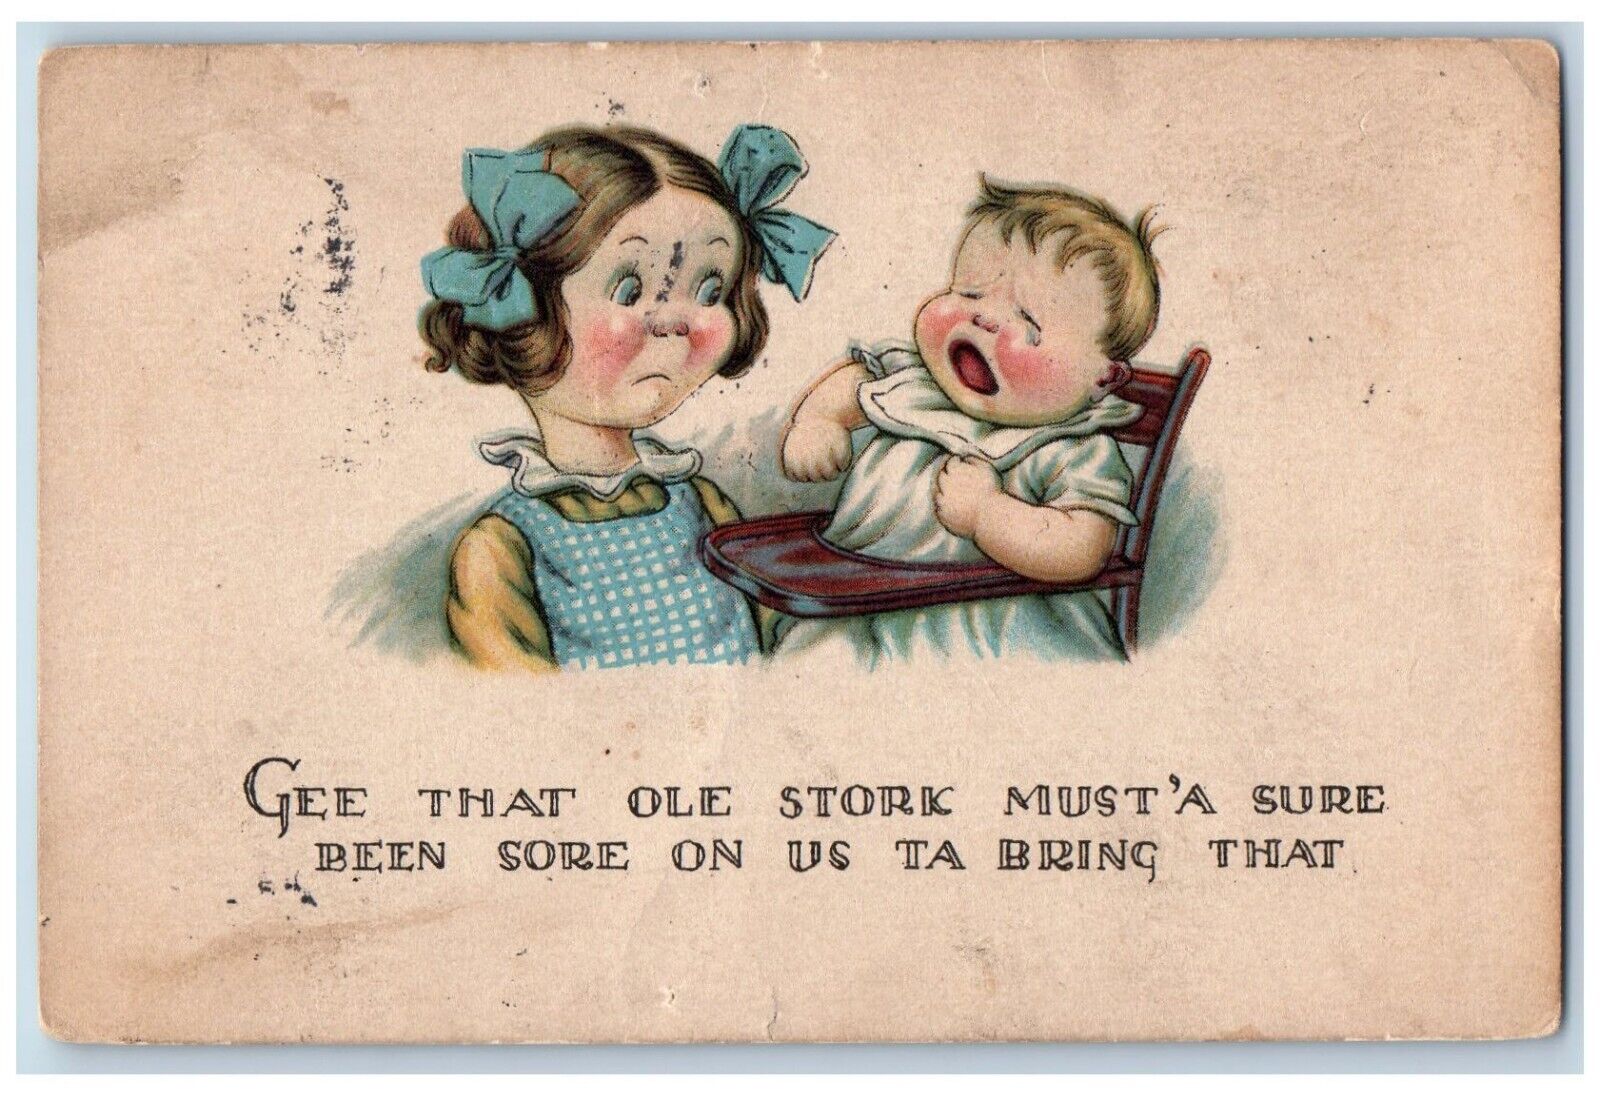 Chicago Oak Park Illinois IL Postcard Crying Baby Stroller 1924 Posted Vintage